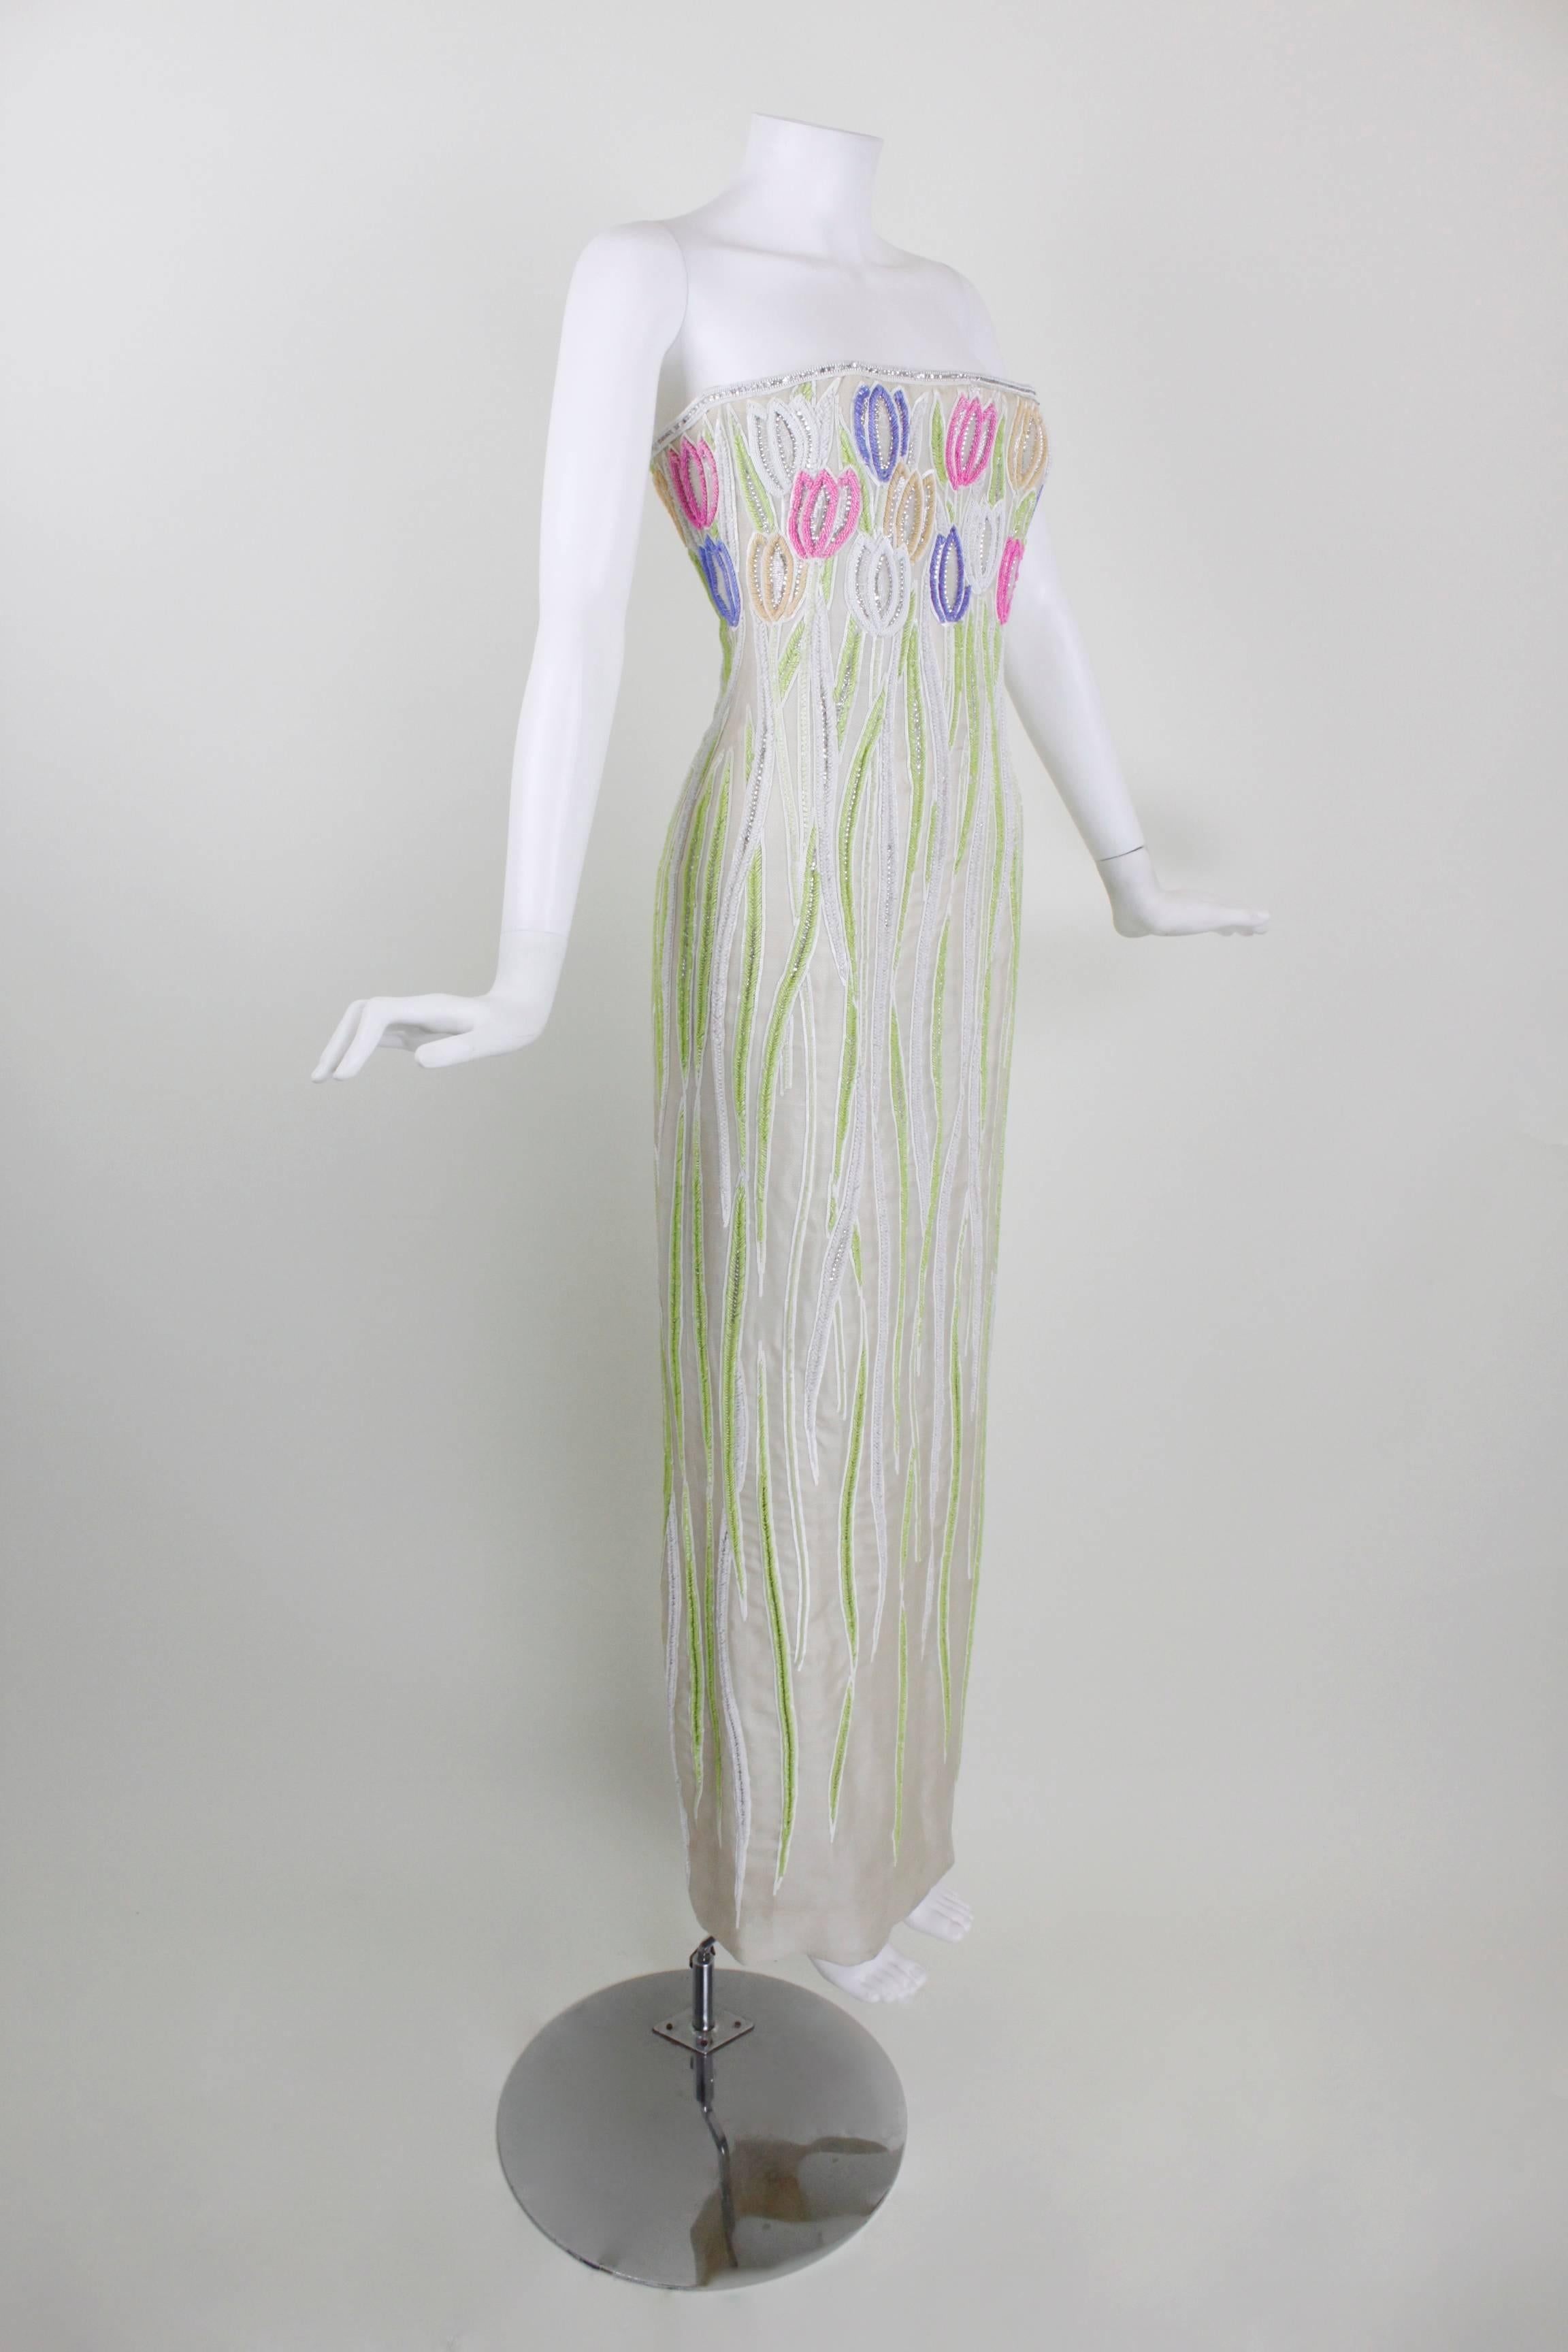 François Lesage was commissioned by the world's leading couturiers to embellish garments with expert, beautiful embroidery. This 1970s Christian Dior haute couture evening gown features gorgeous, textured, dimensional embroidery throughout.